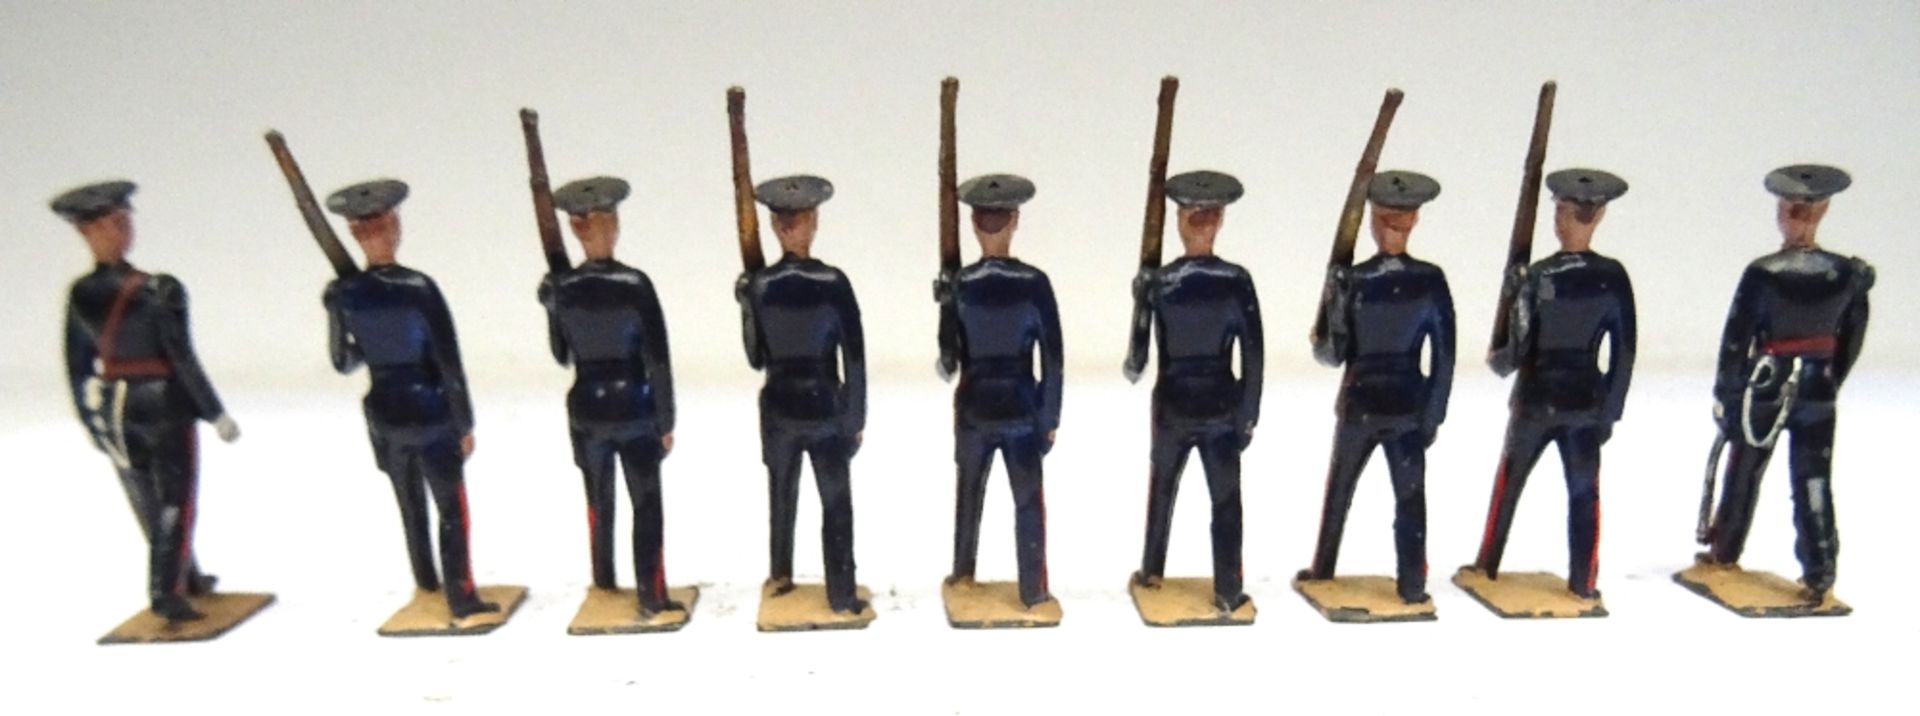 Britains set 1537, Territorials at the slope, blue uniforms - Image 4 of 5